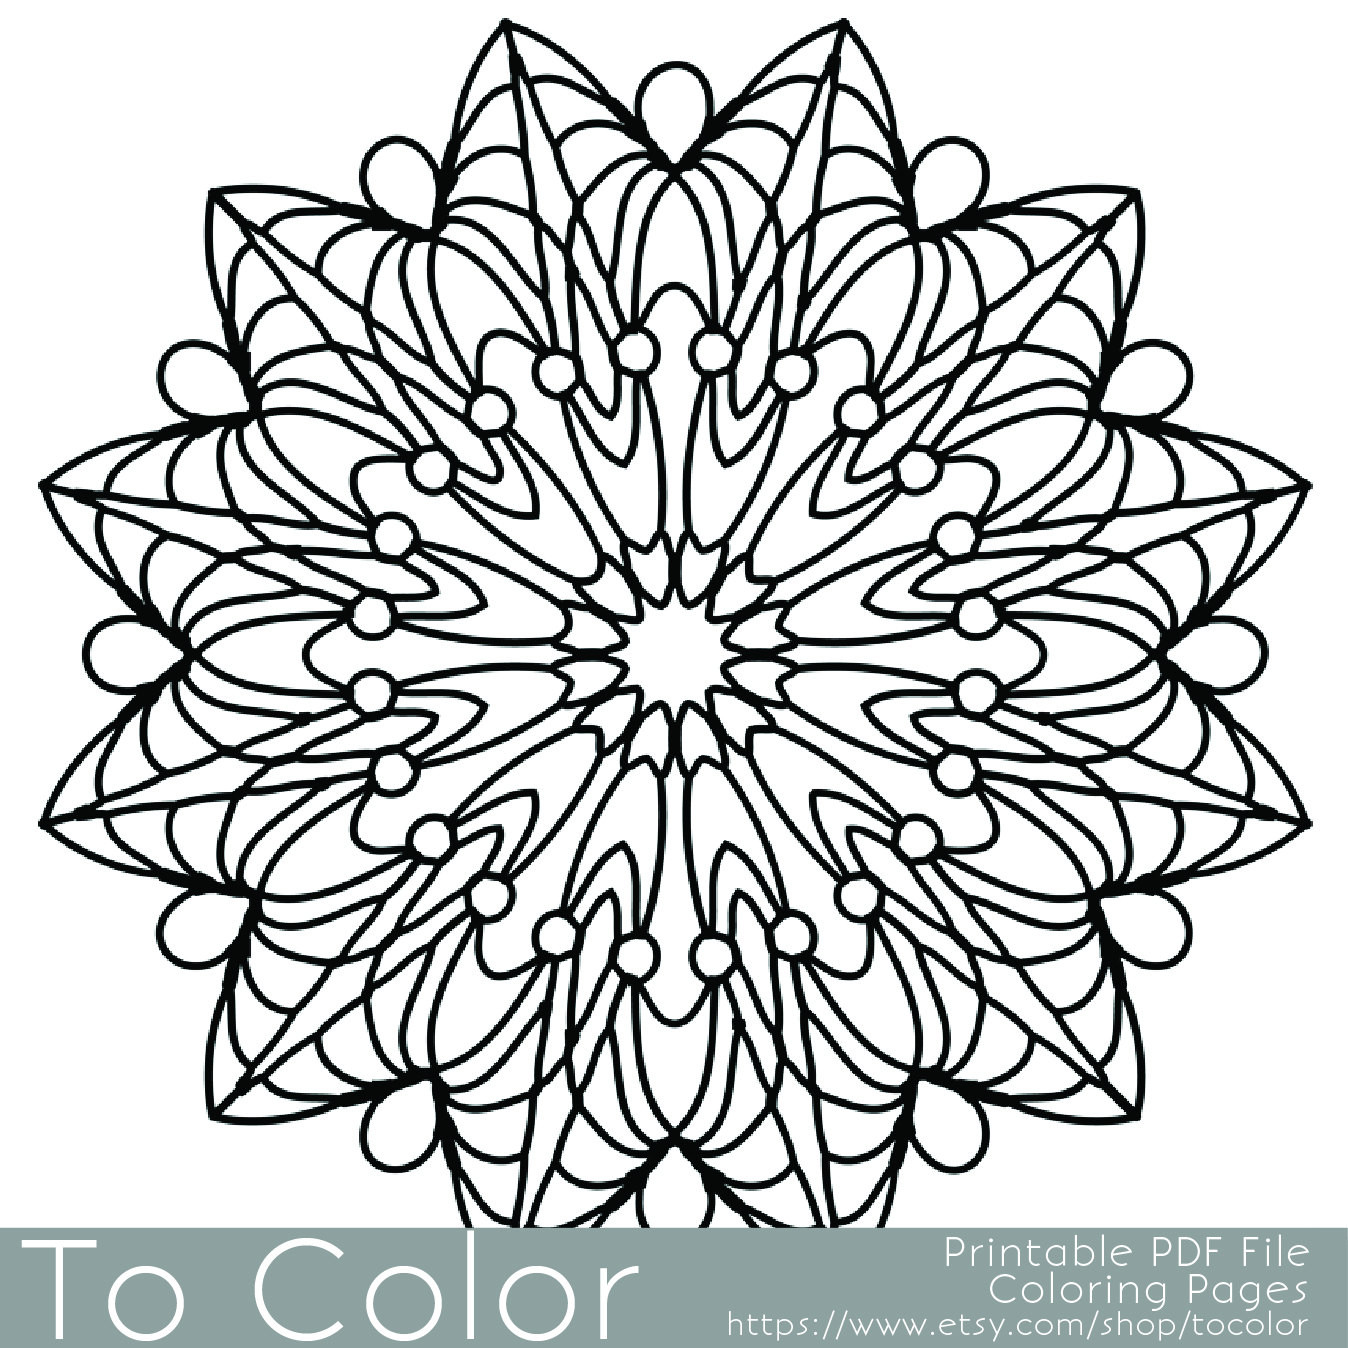 Print Free Coloring Pages For Adults
 Simple Printable Coloring Pages for Adults Gel Pens Mandala